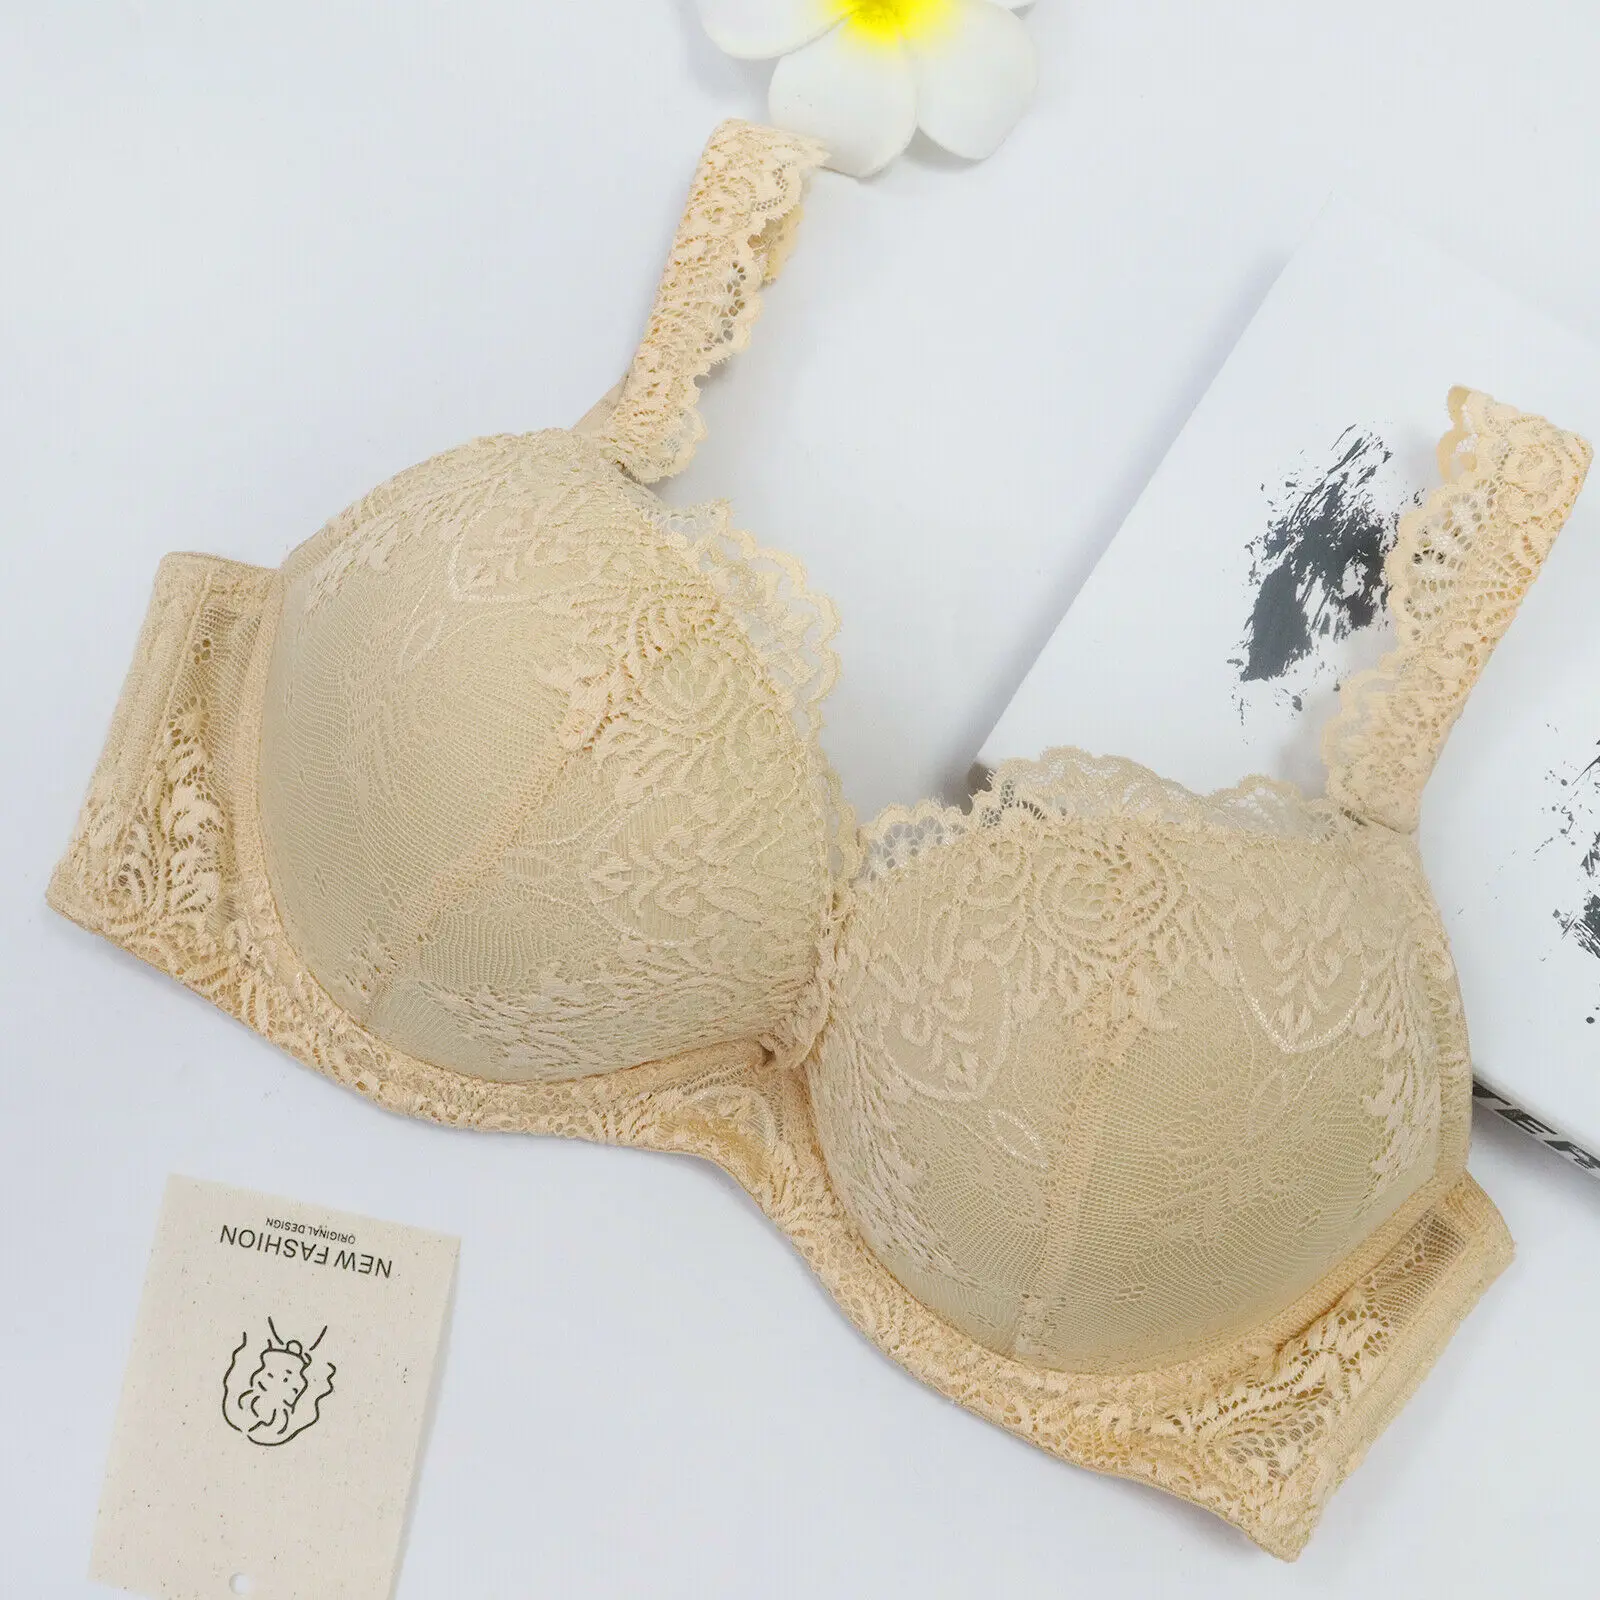 2022 Sexy Women's Bras Lace Thick Padded Ultra Push Up Bra Wire Embroidery Brassiere 65 70 75 80 85 90 95 100 A B C D DD E underwire bra